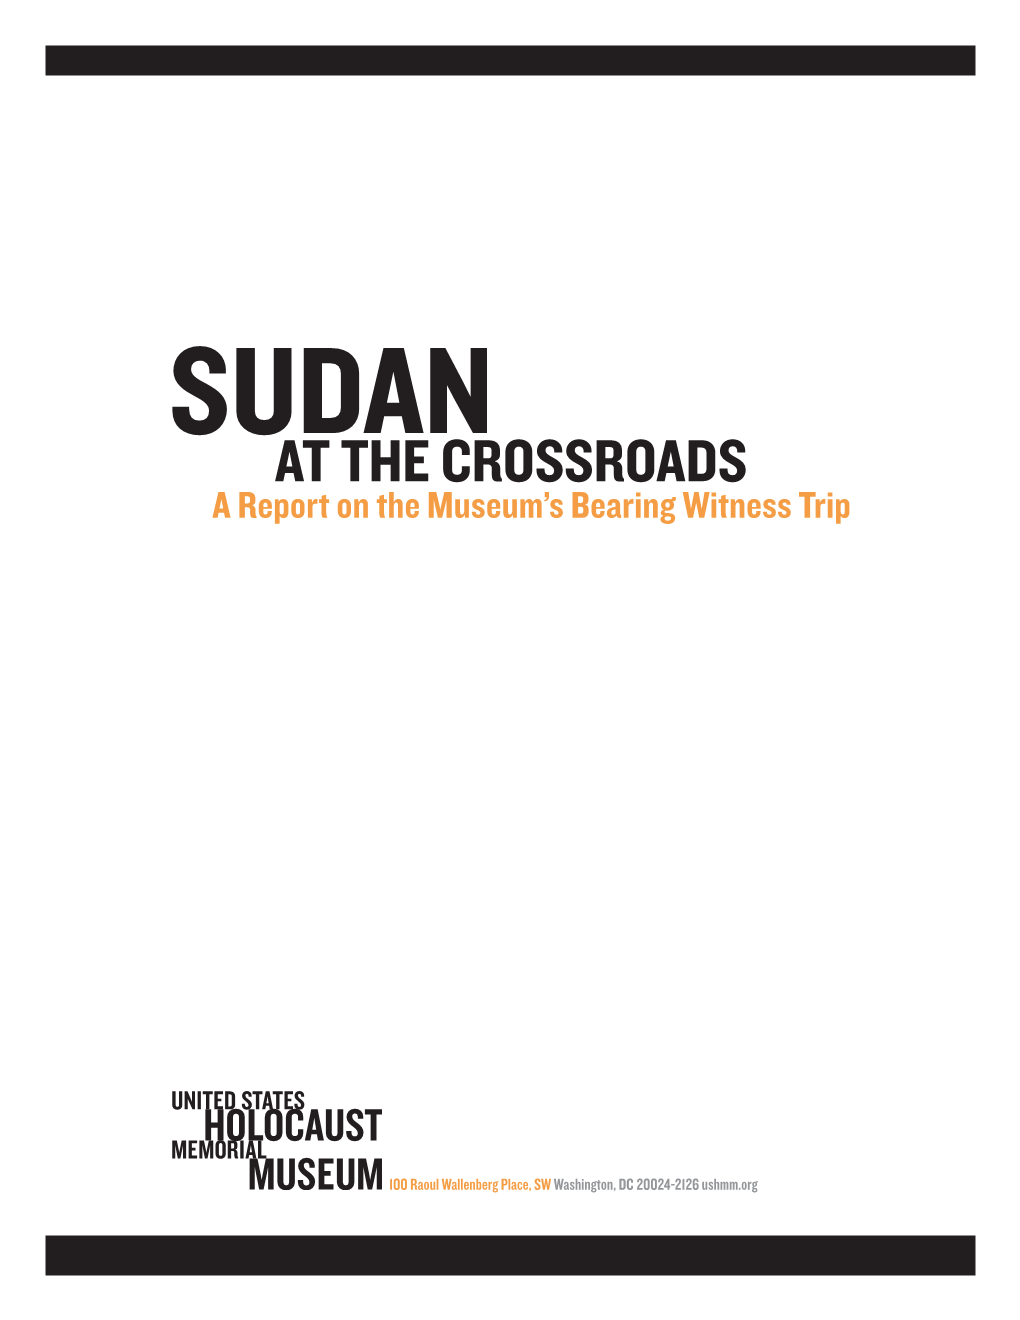 Sudan at the Crossroads: a Report on the Museum's Bearing Witness Trip